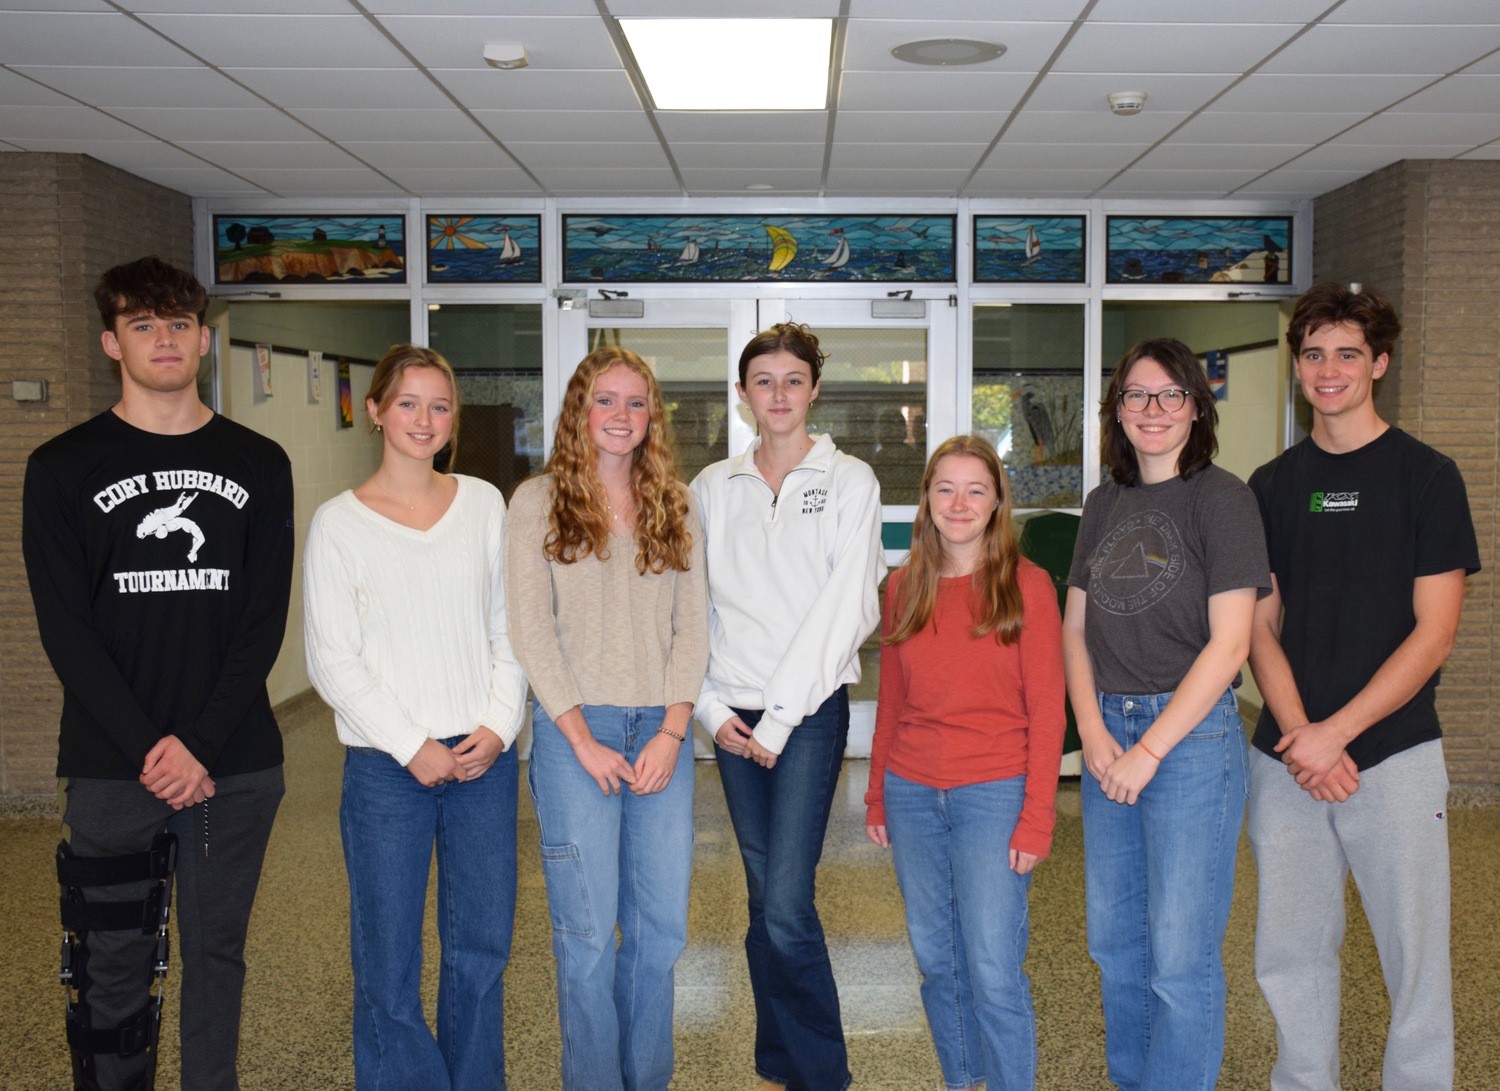 Seven Westhampton Beach High School students - Jane Atkinson,Charles Bookamer, Jessica Curran, Ryan Fives, Sarah Gormley, Meghan Kelly and Kate
Pomroyhave earned New York State Scholarships for Academic Excellence. COURTESY WESTHAMPTON BEACH SCHOOL DISTRICT